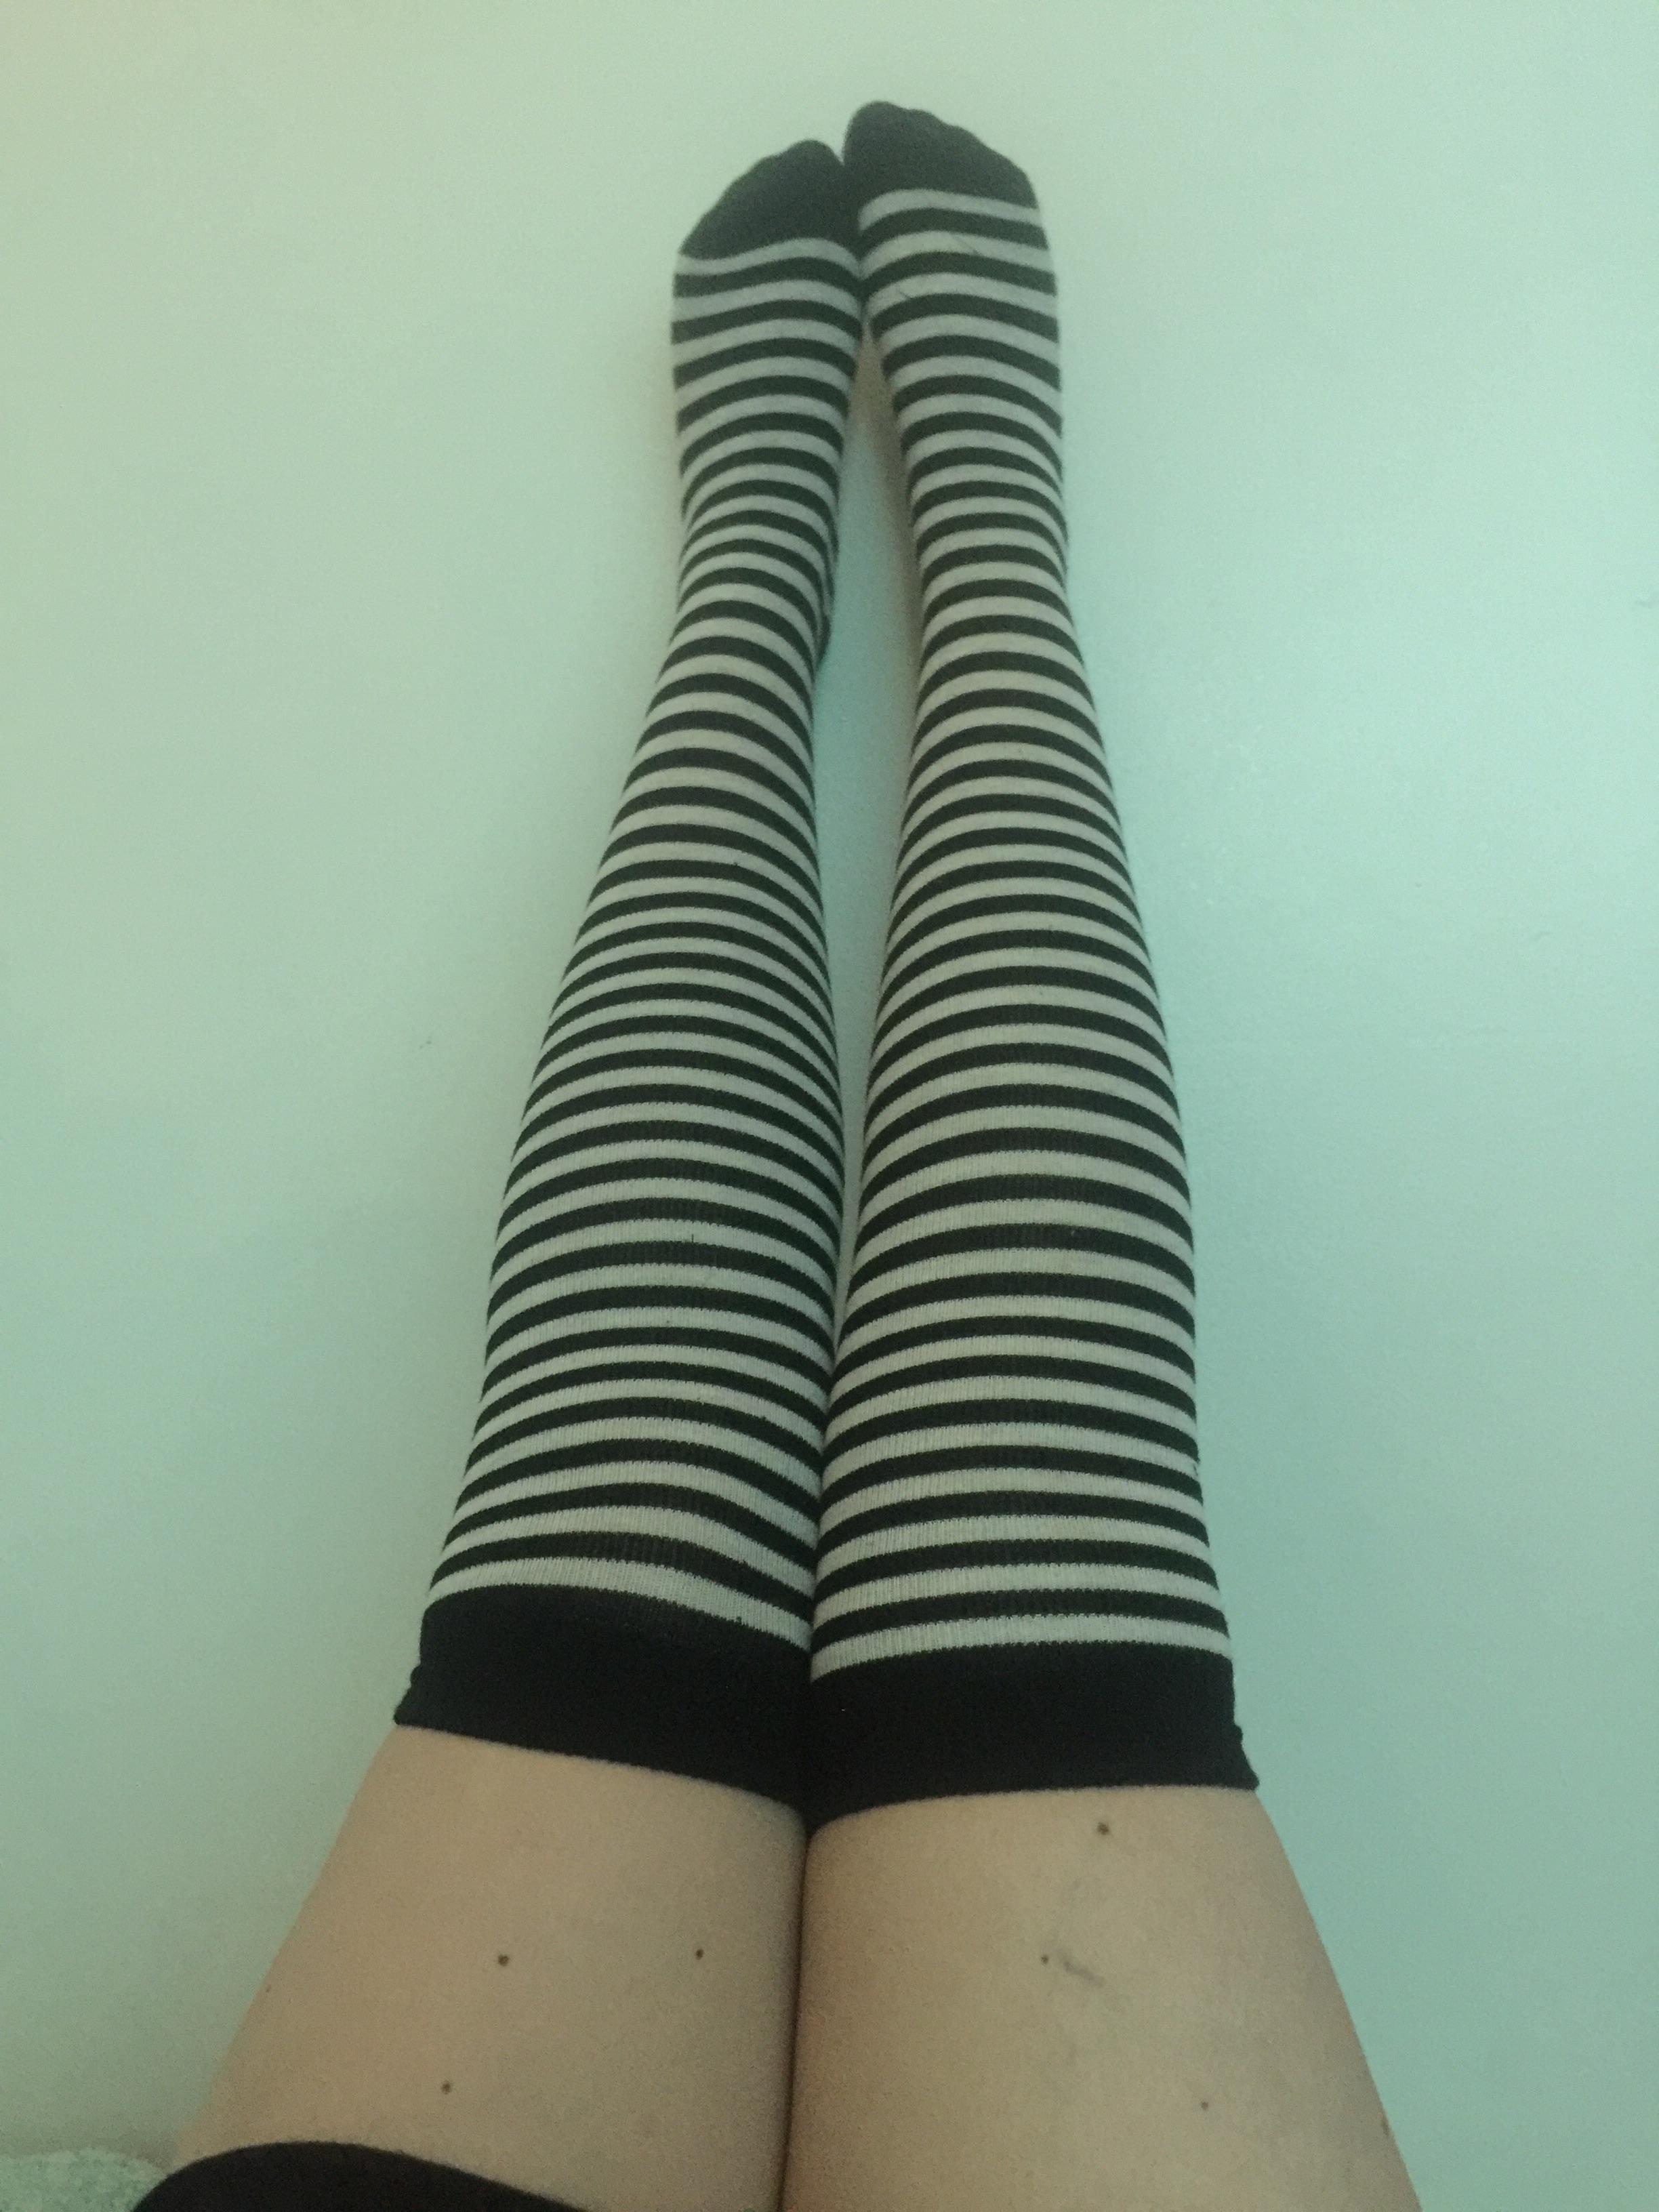 Recently reached my weight loss goal of being able to wear over the knee socks. Feels cute.